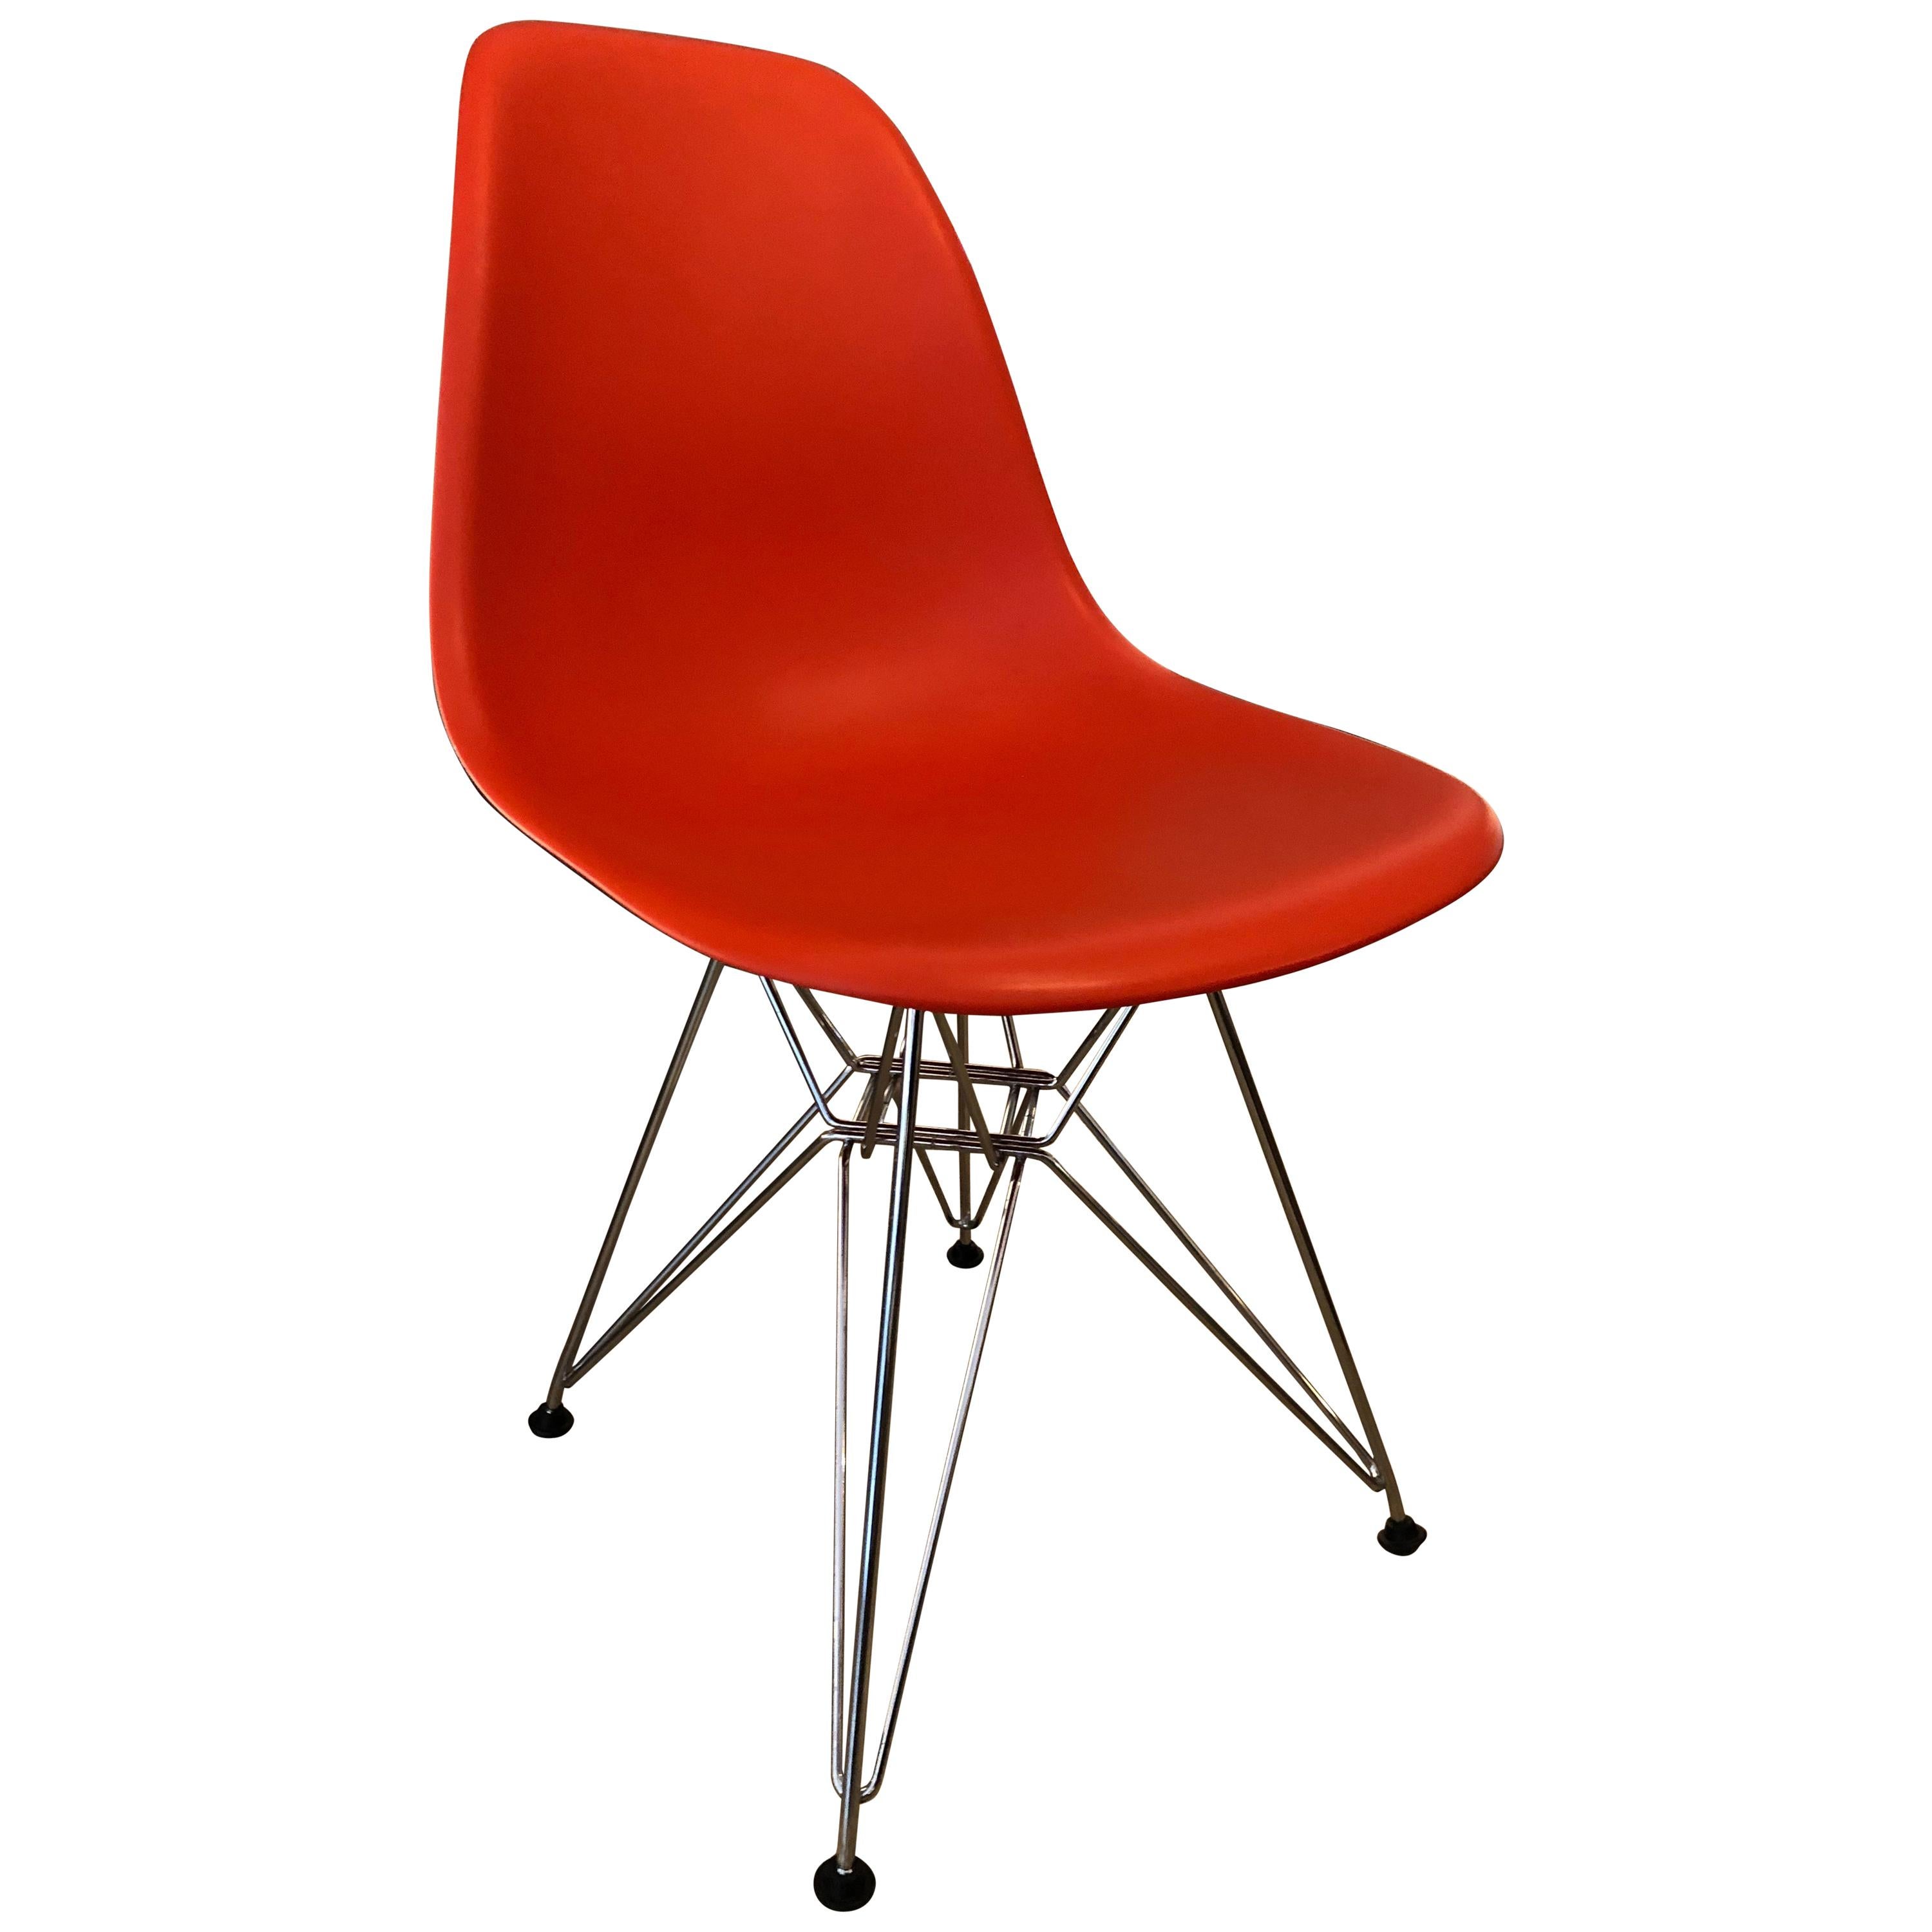 Eames Plastic Red Chair, Vitra For Sale